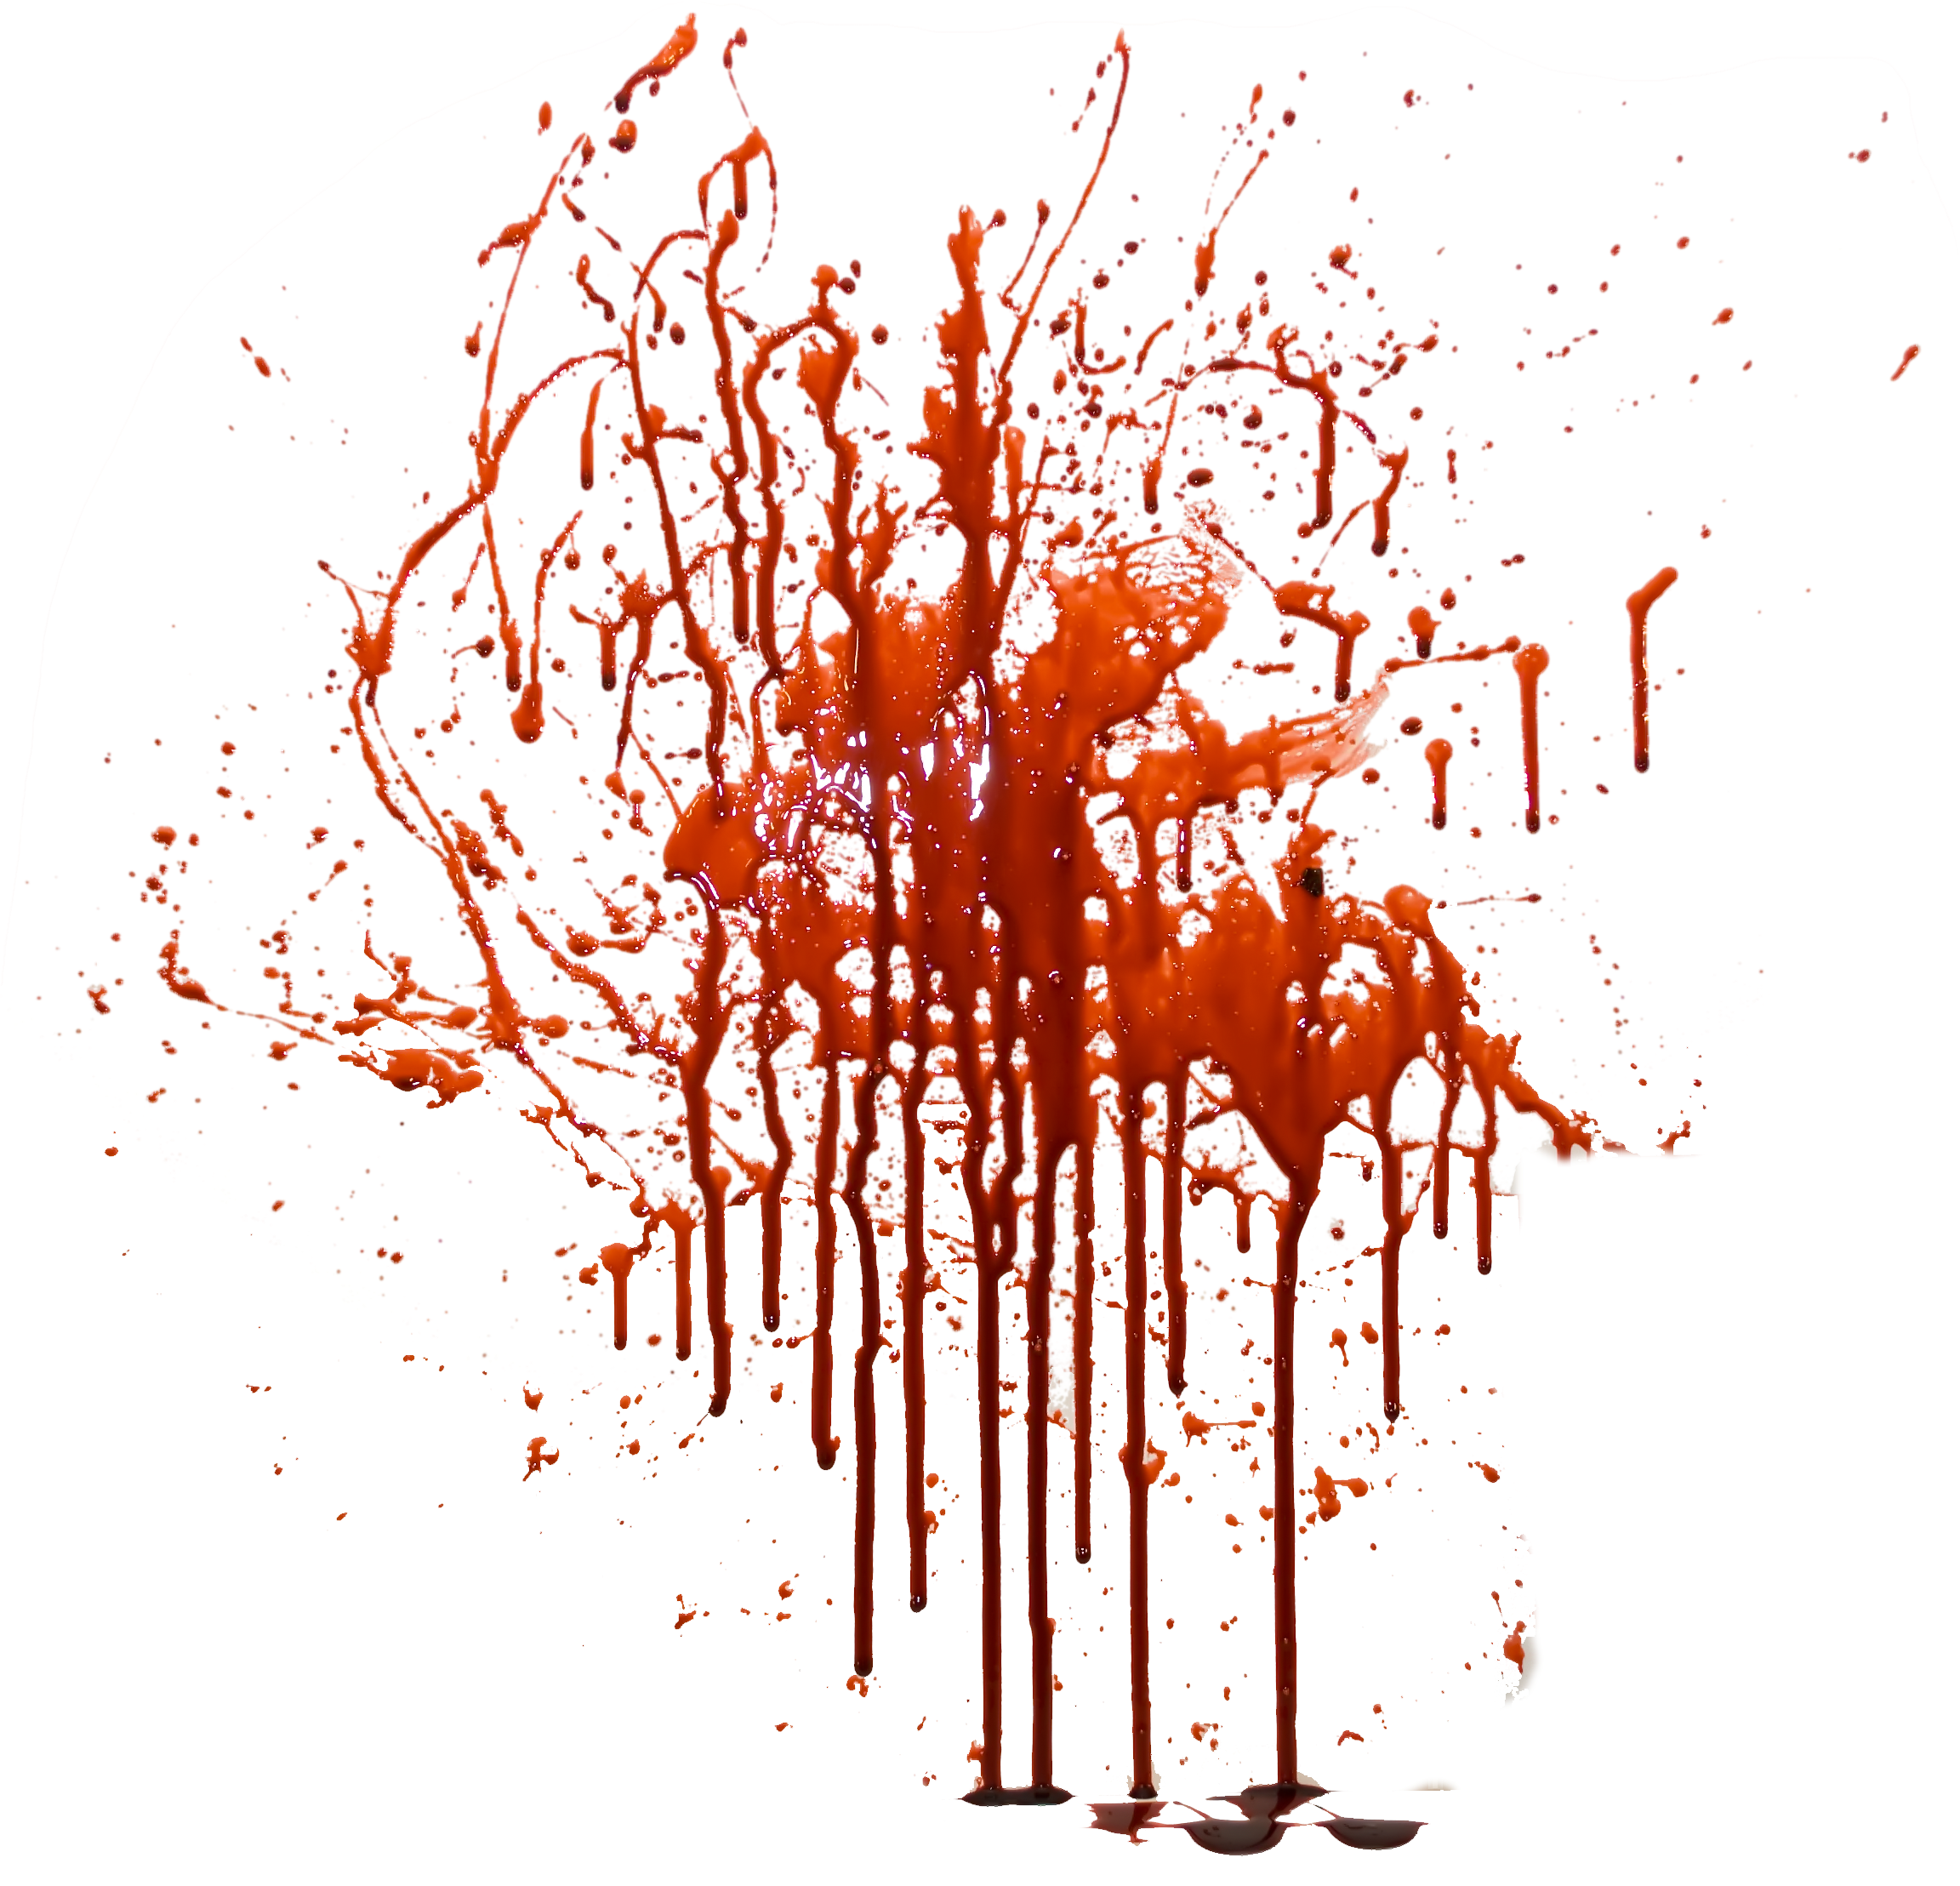 Painting Blood PNG | Picpng.